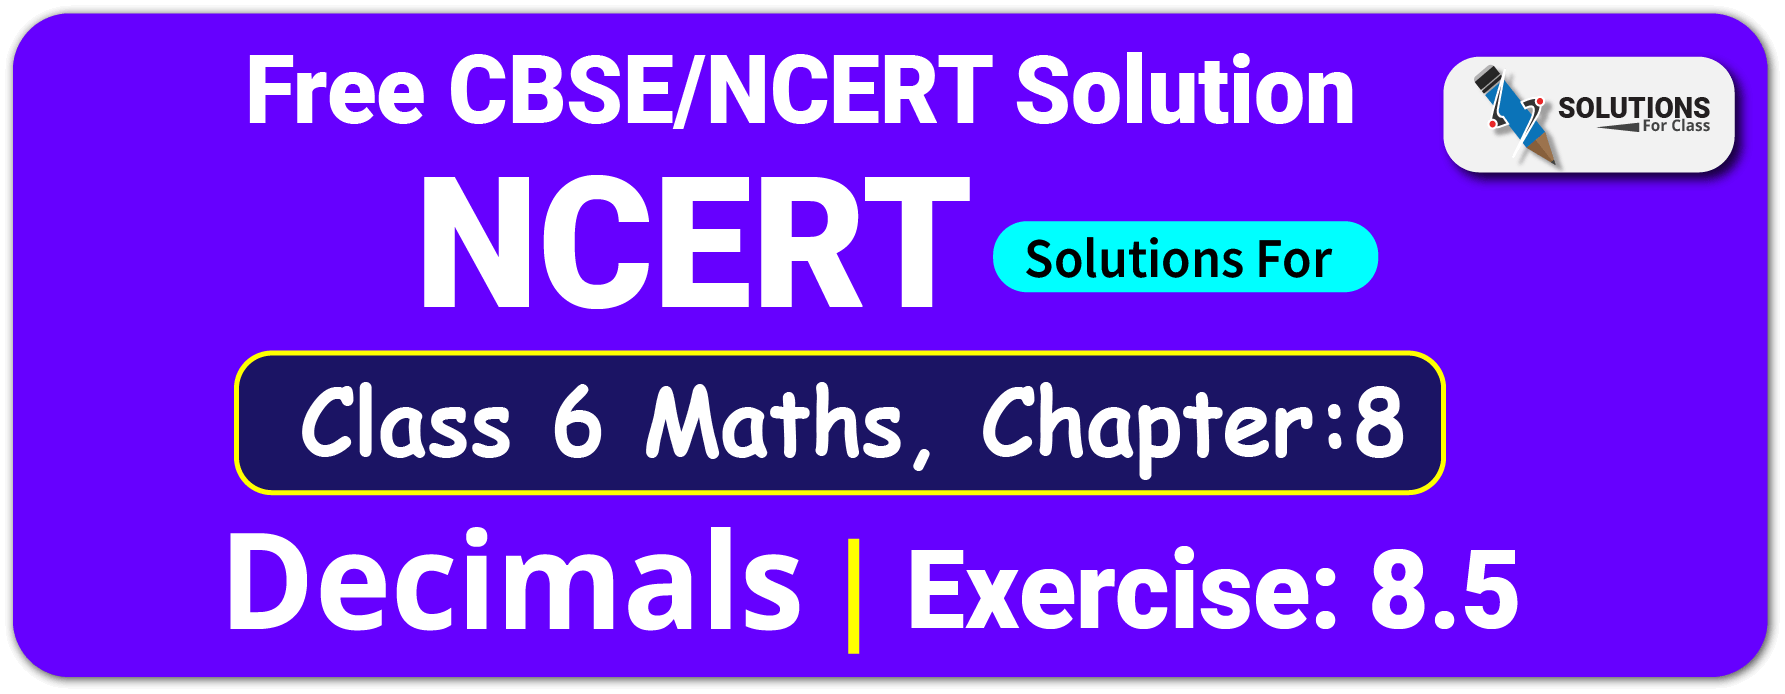 NCERT Solutions For Class 6 Maths Chapter 8 Decimals Exercise 8.5